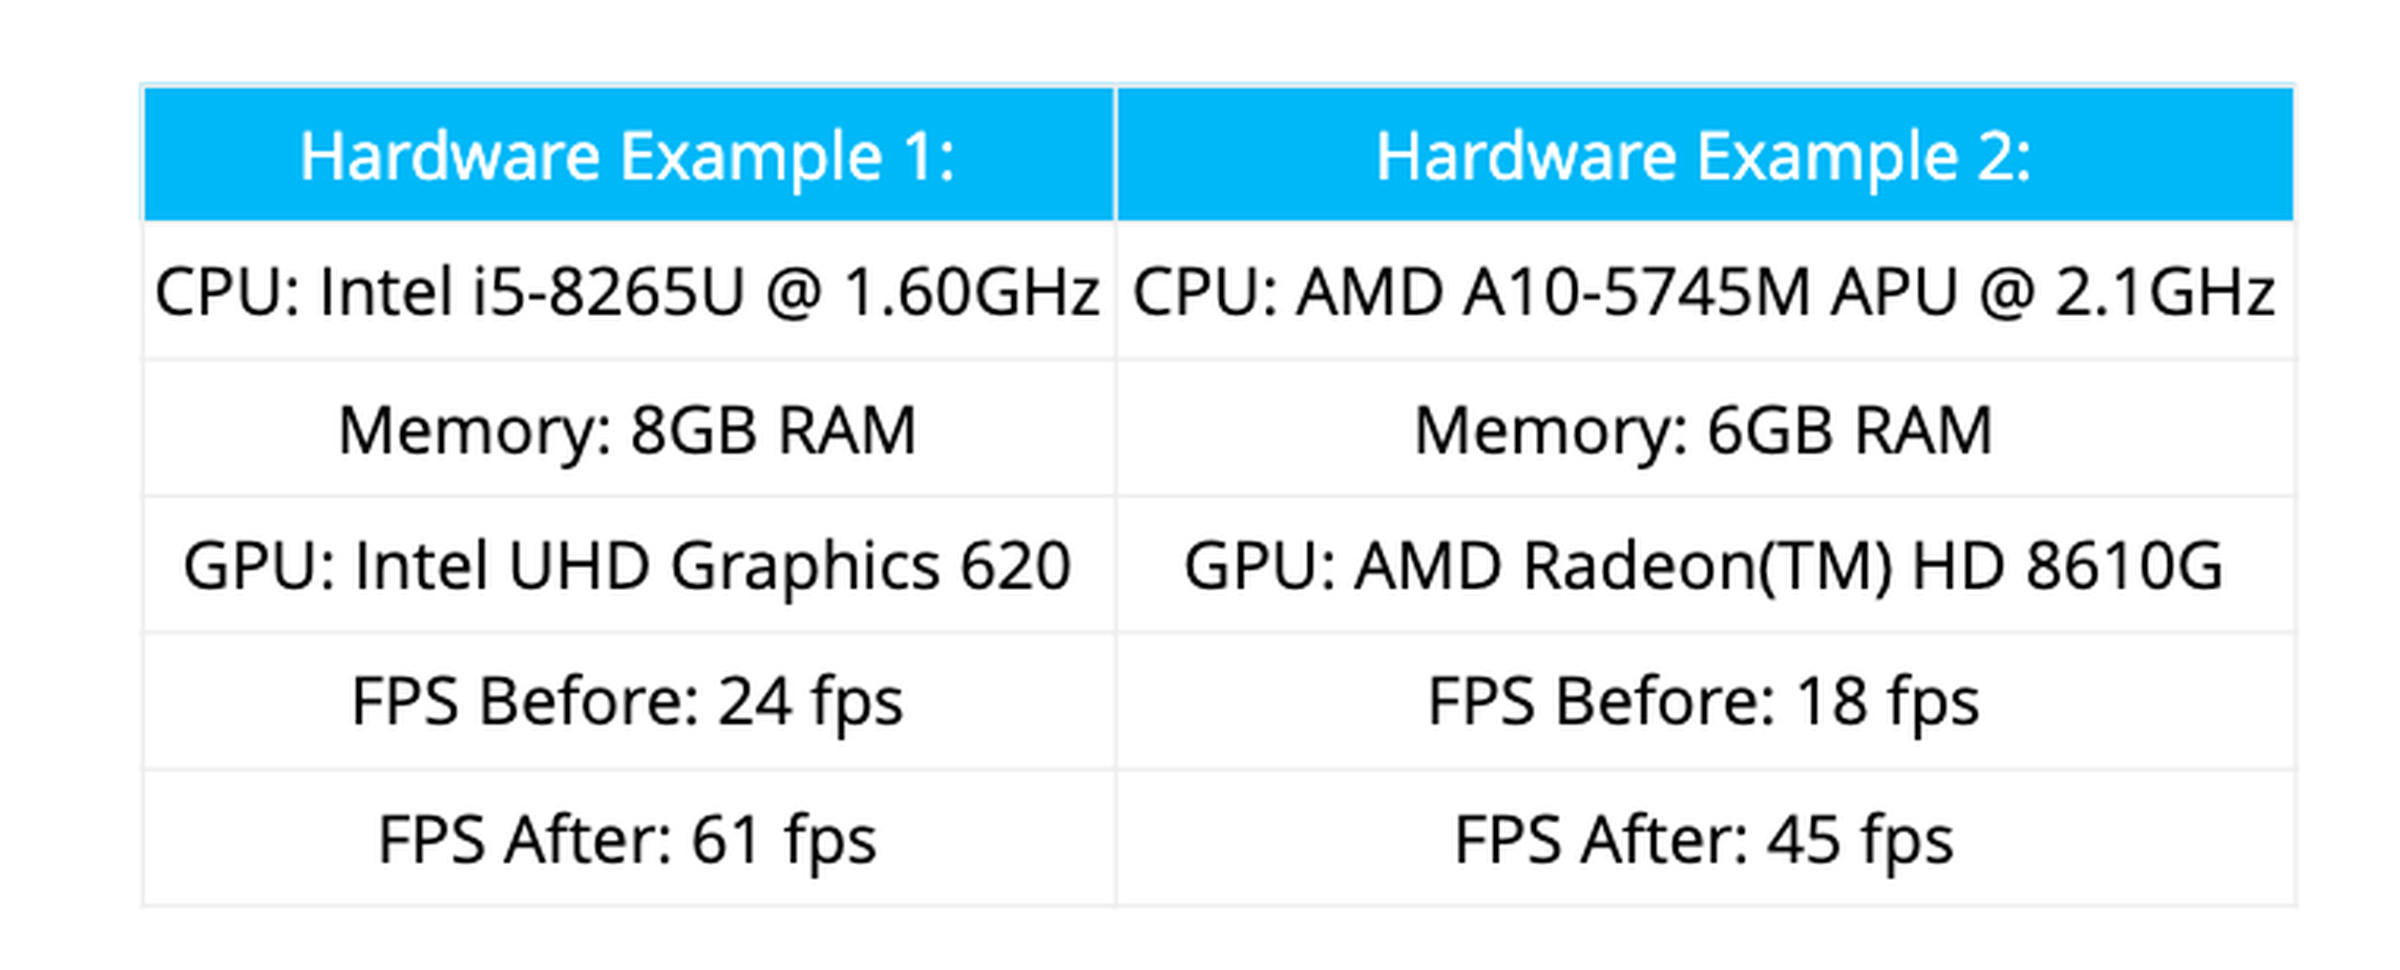 FPS gains in performance mode on representative hardware.